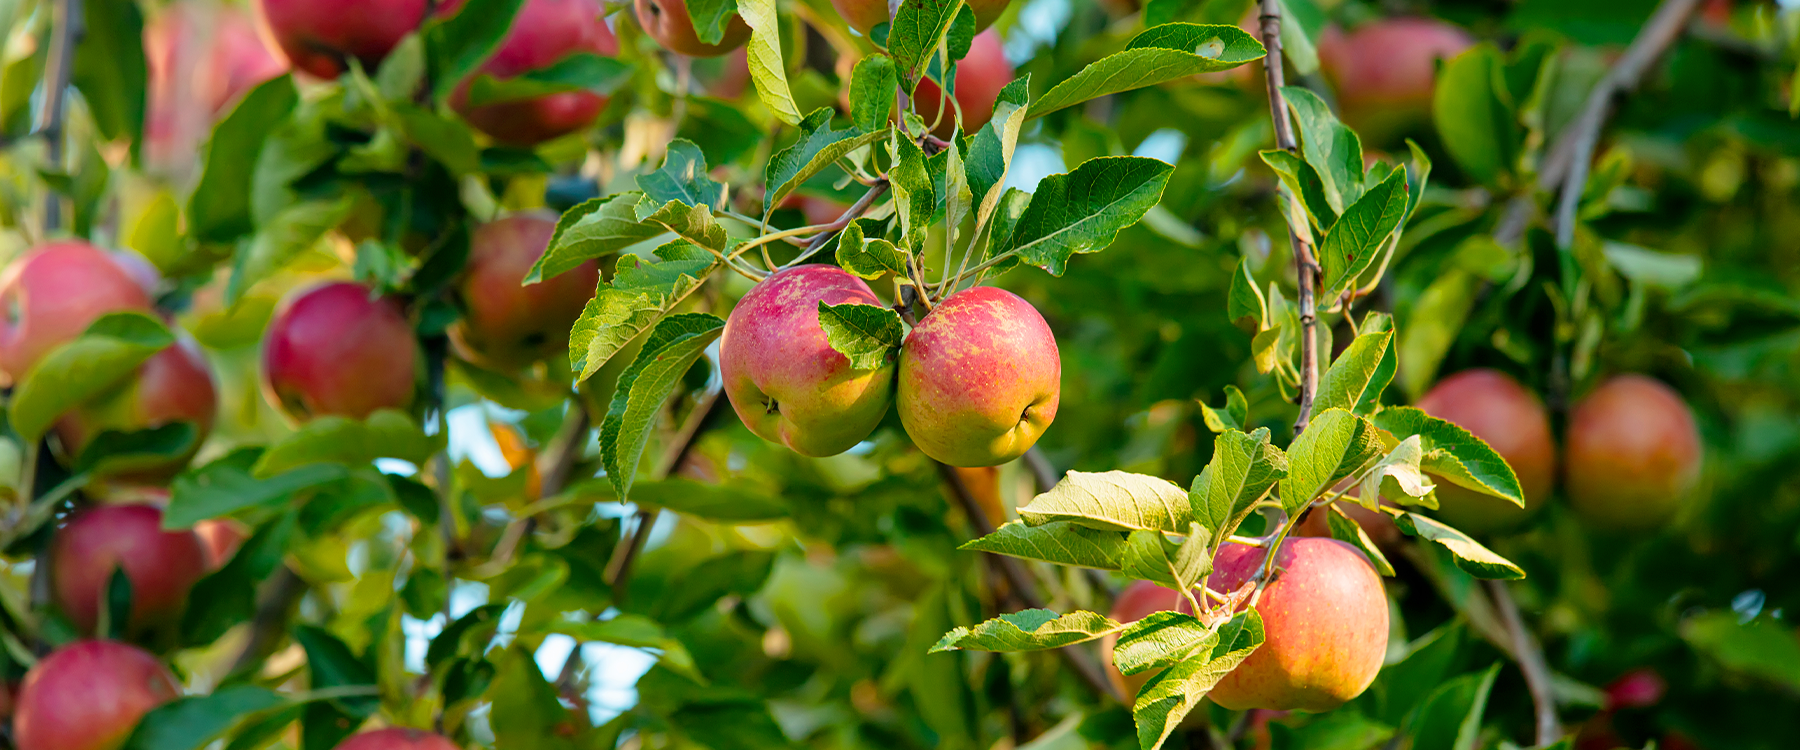 How to Grow Apple Trees: 6 Easy Steps Anyone Can Do